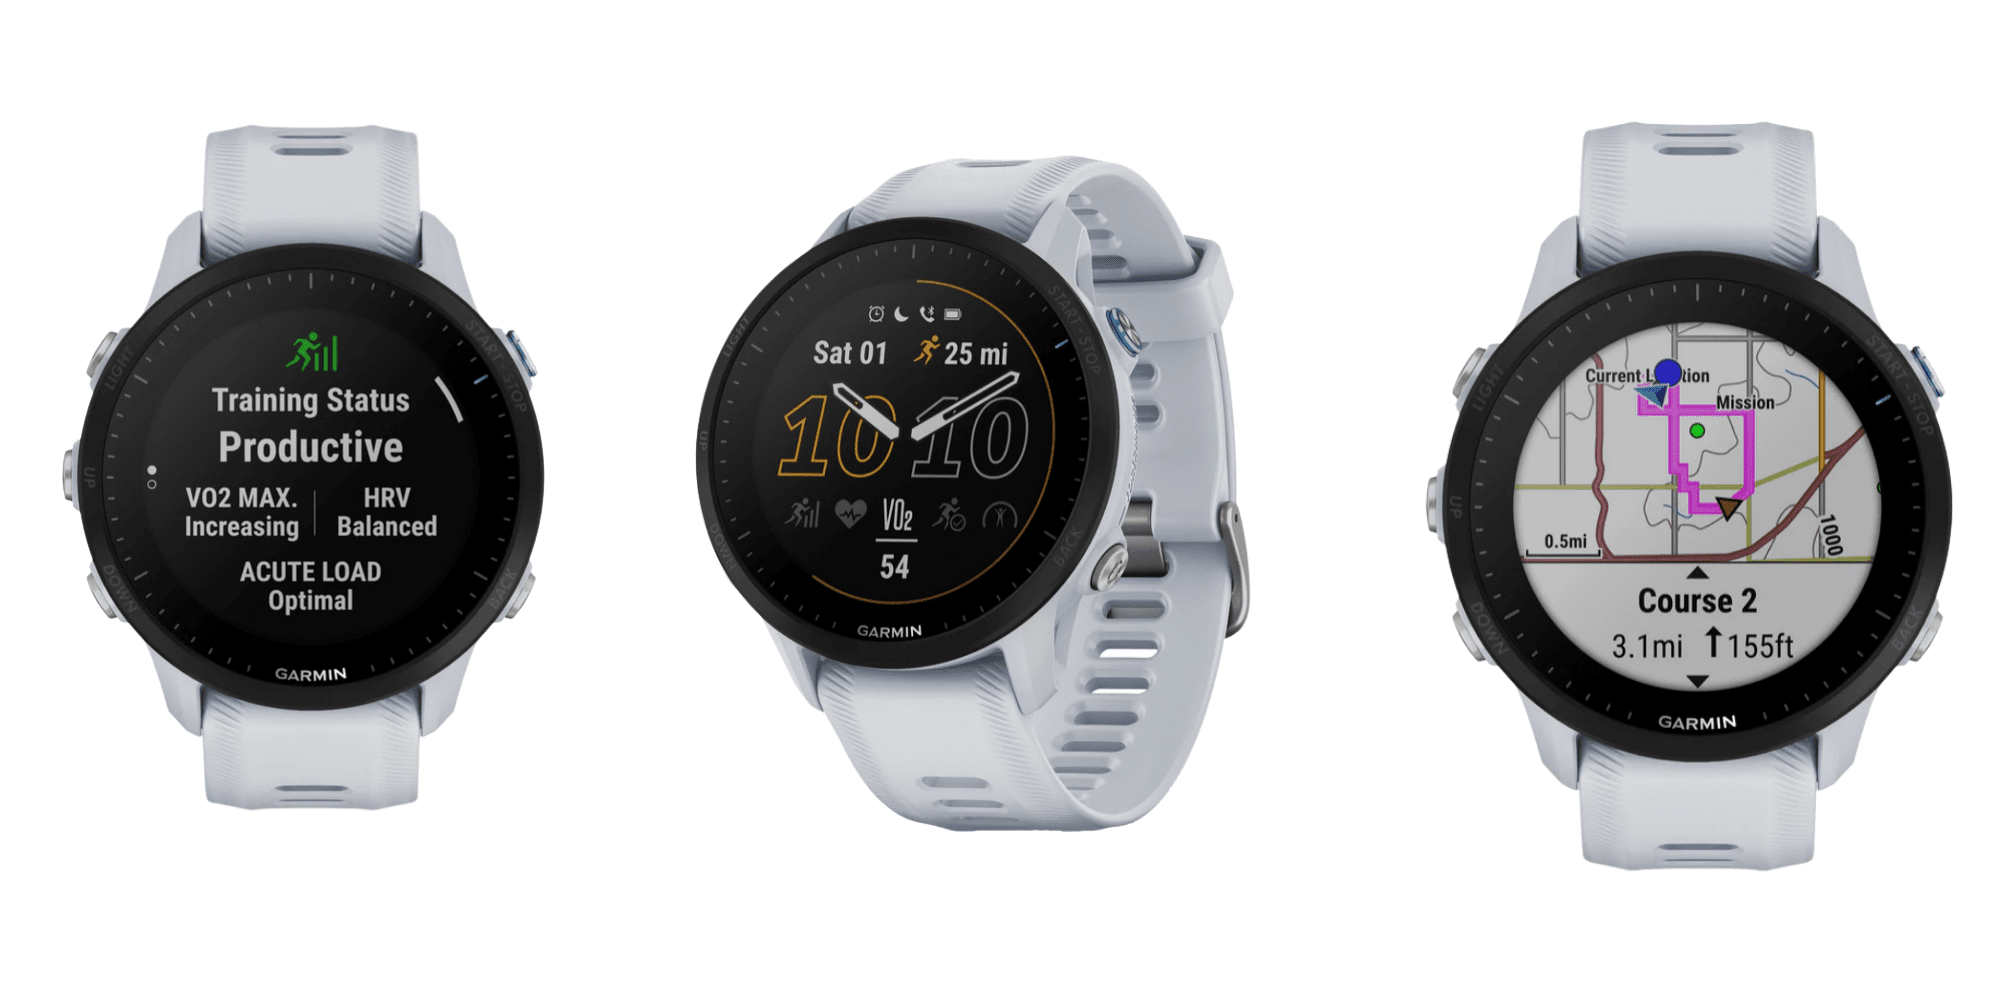 Garmin Forerunner 955 vs Forerunner 945 Compared – Now with touch screen and solar